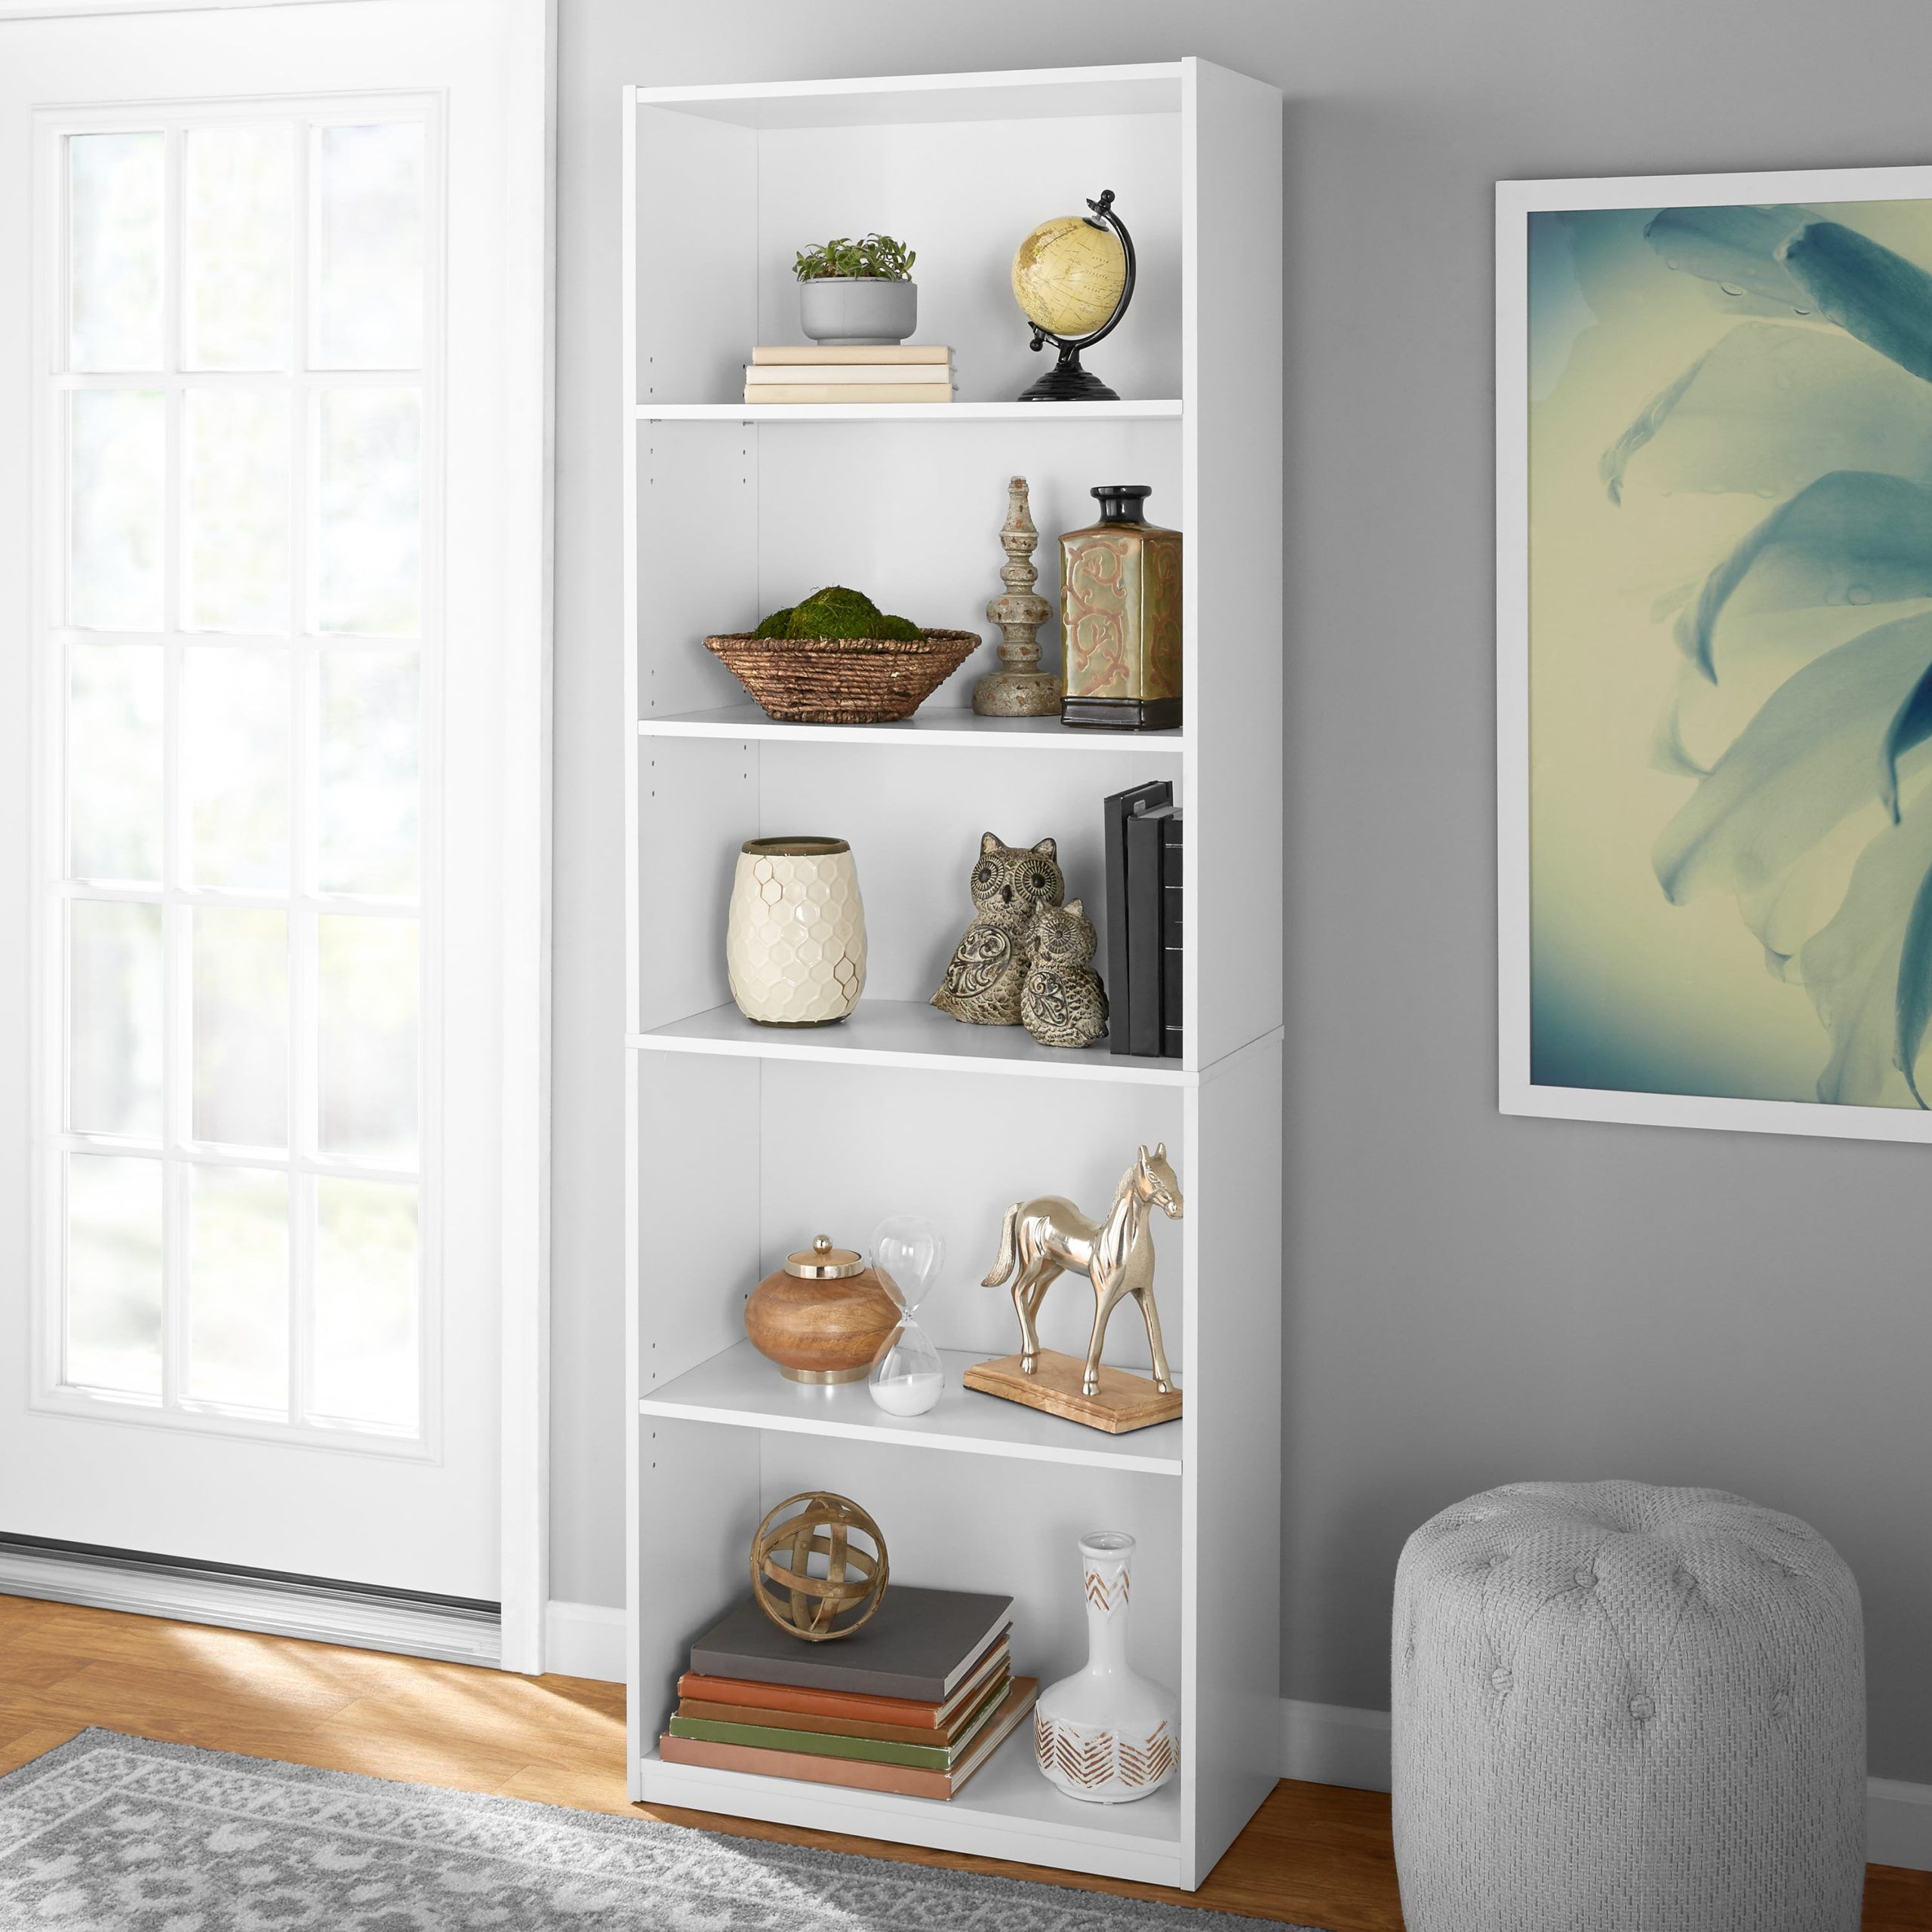 Mainstays 5 Shelf Bookcase With Adjustable Shelves, White – Walmart Pertaining To Bookcases With Five Shelves (View 2 of 15)